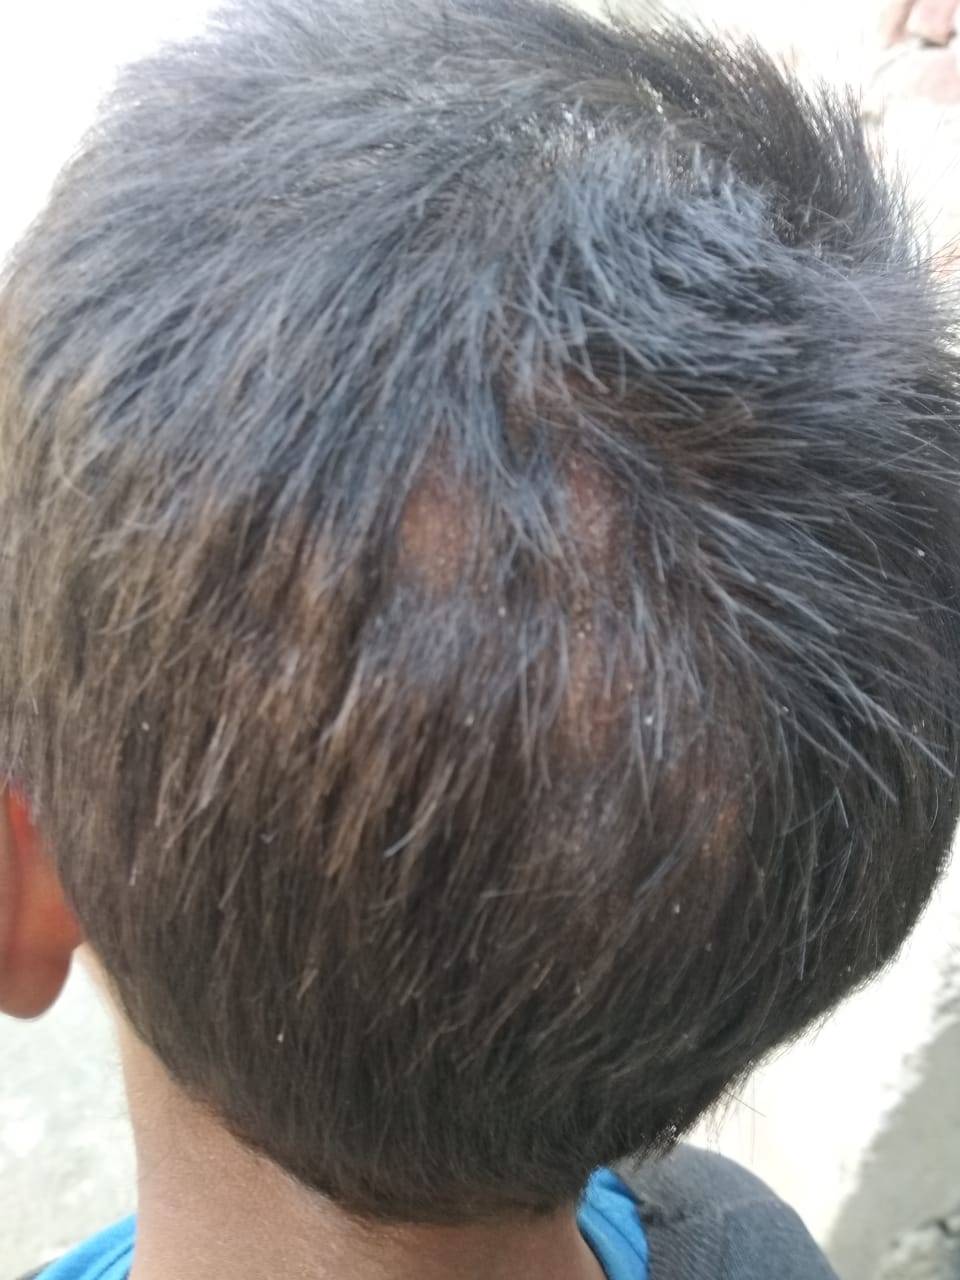 Folliculitis of Scalp In Child Cured with homeopathy | Case Study